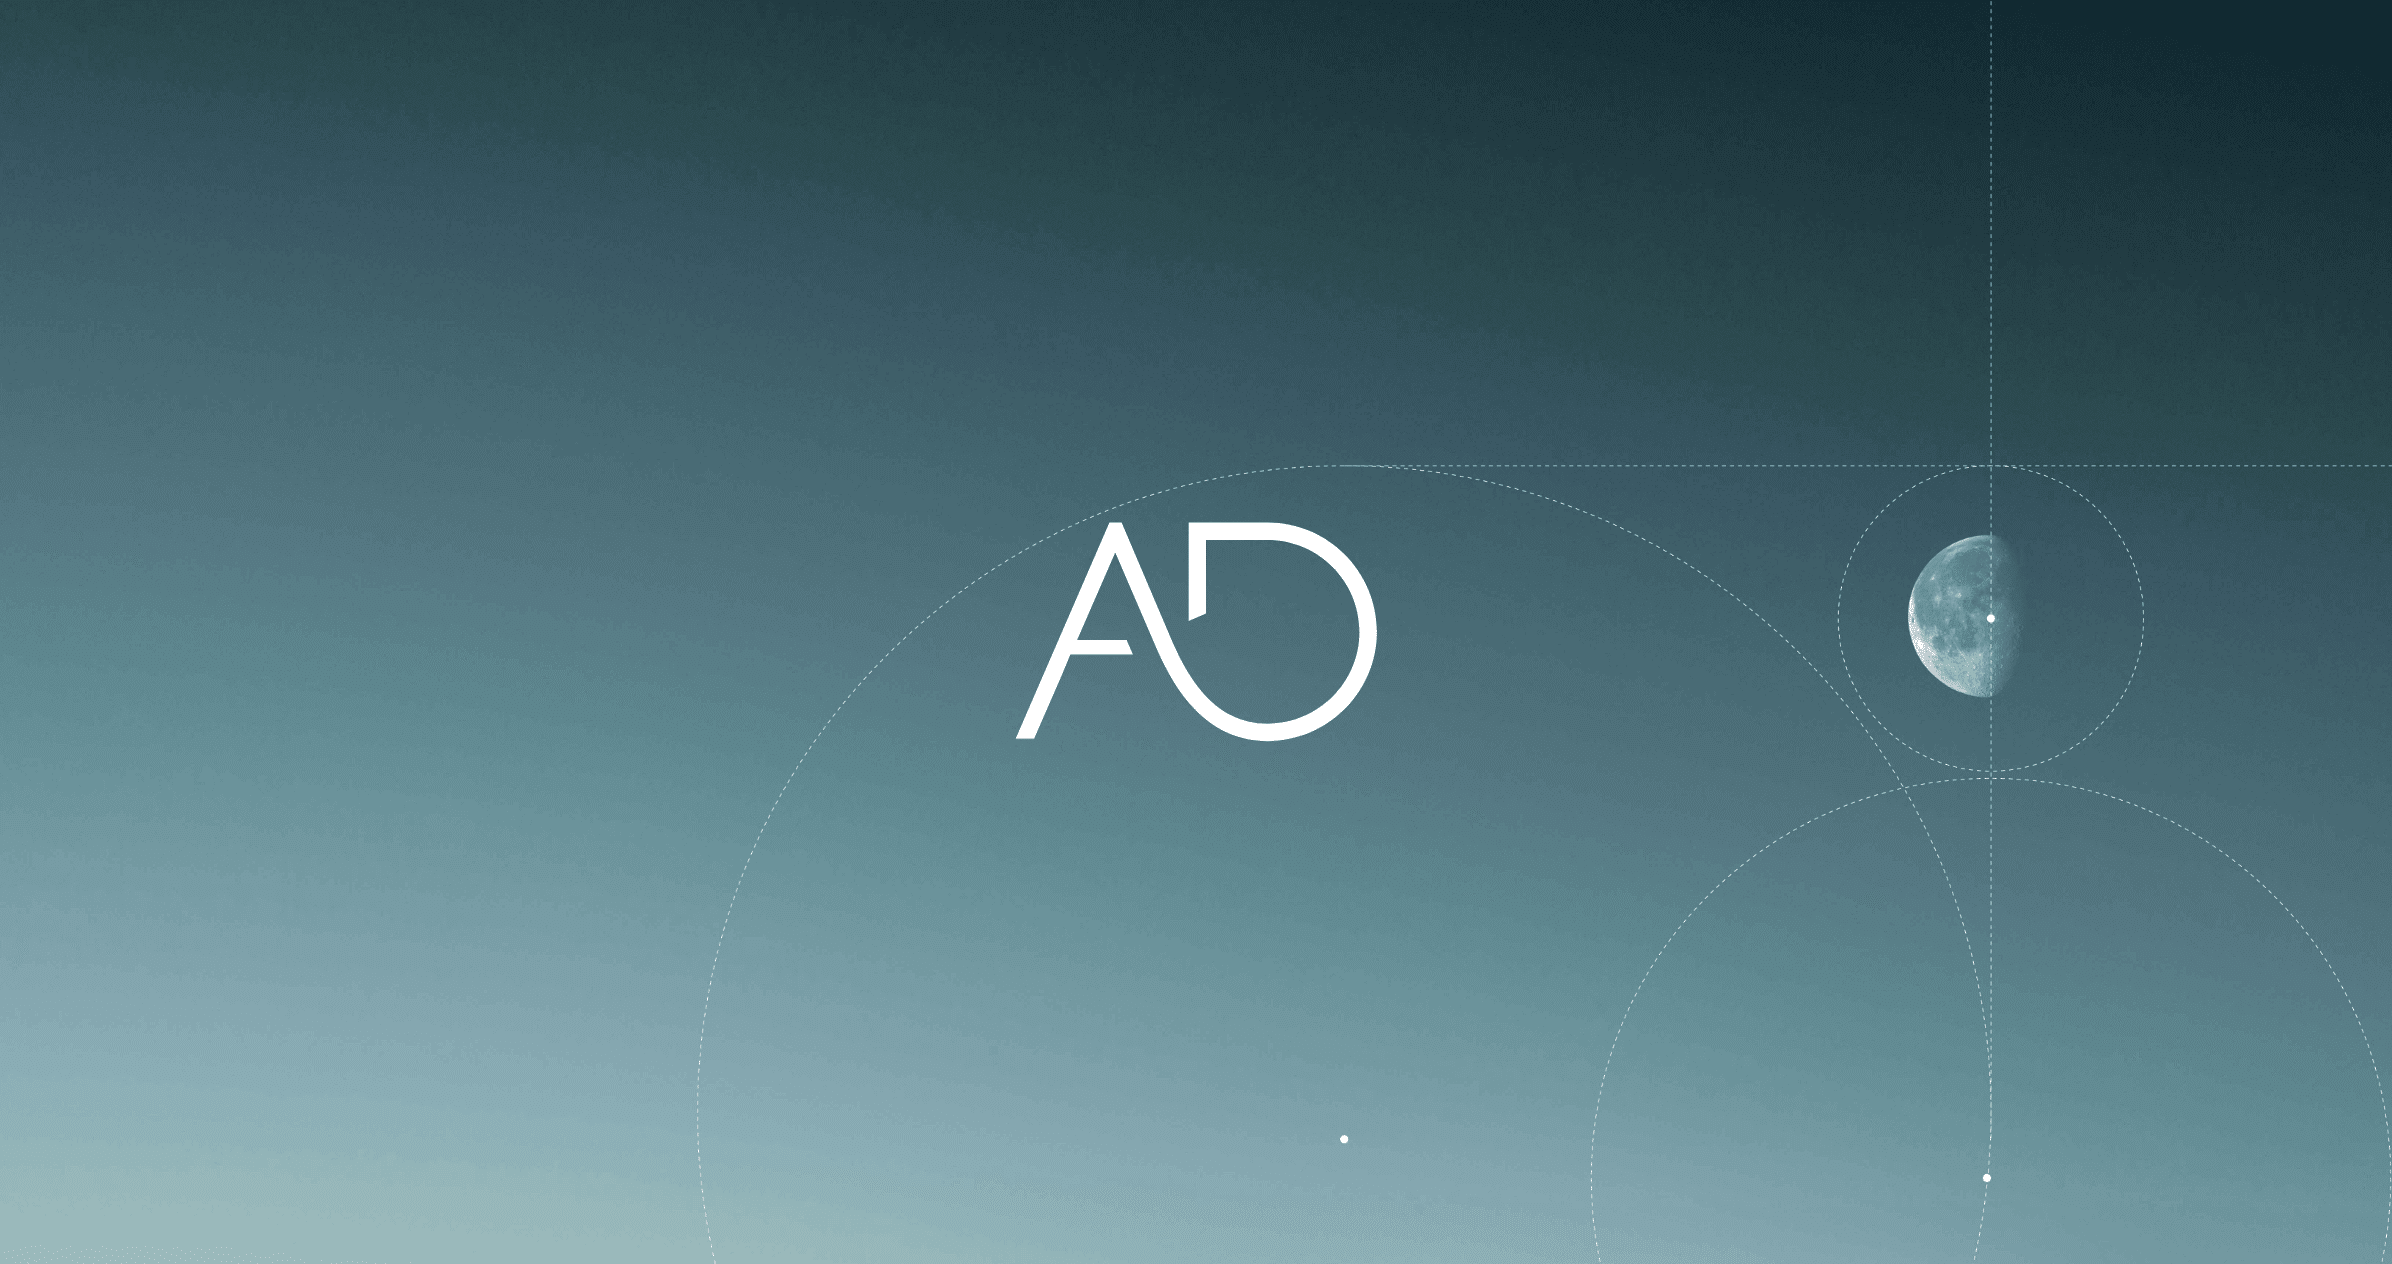 From August Debouzy to the A.D. experience: branding for a success story